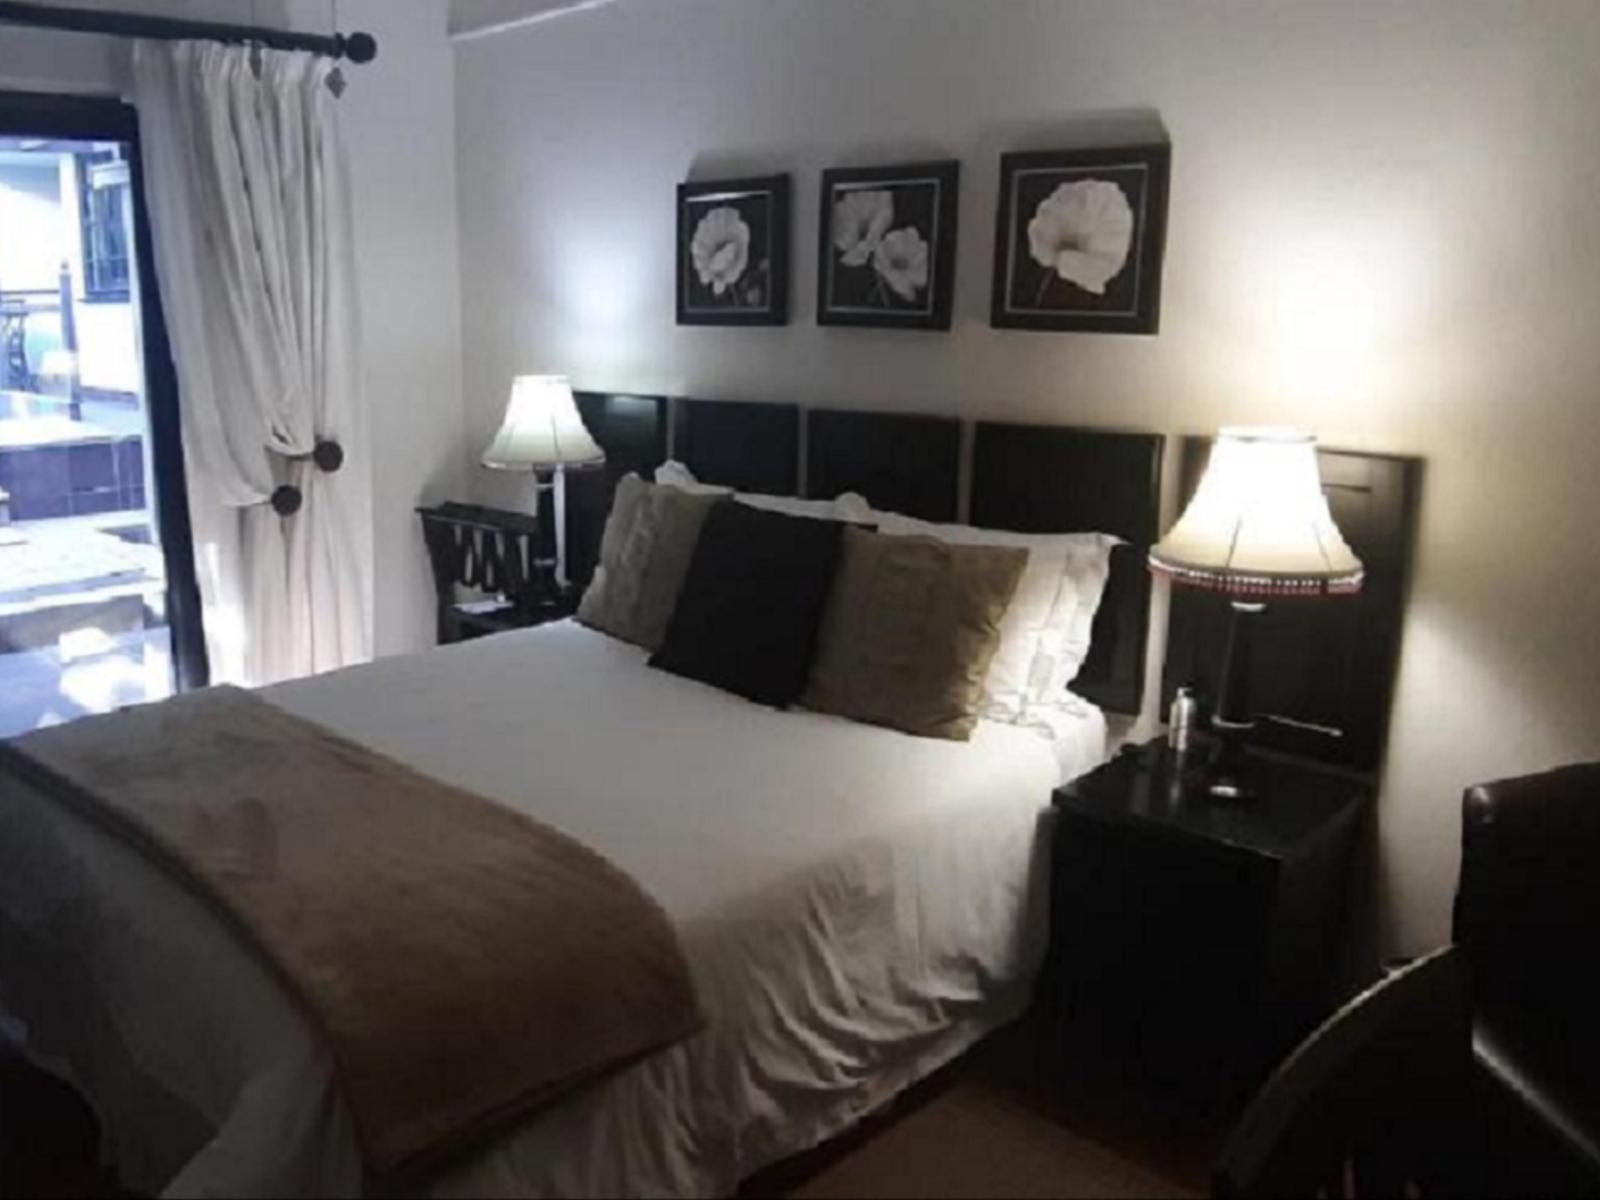 The Villa Guest House Bayswater Bloemfontein Free State South Africa Bedroom